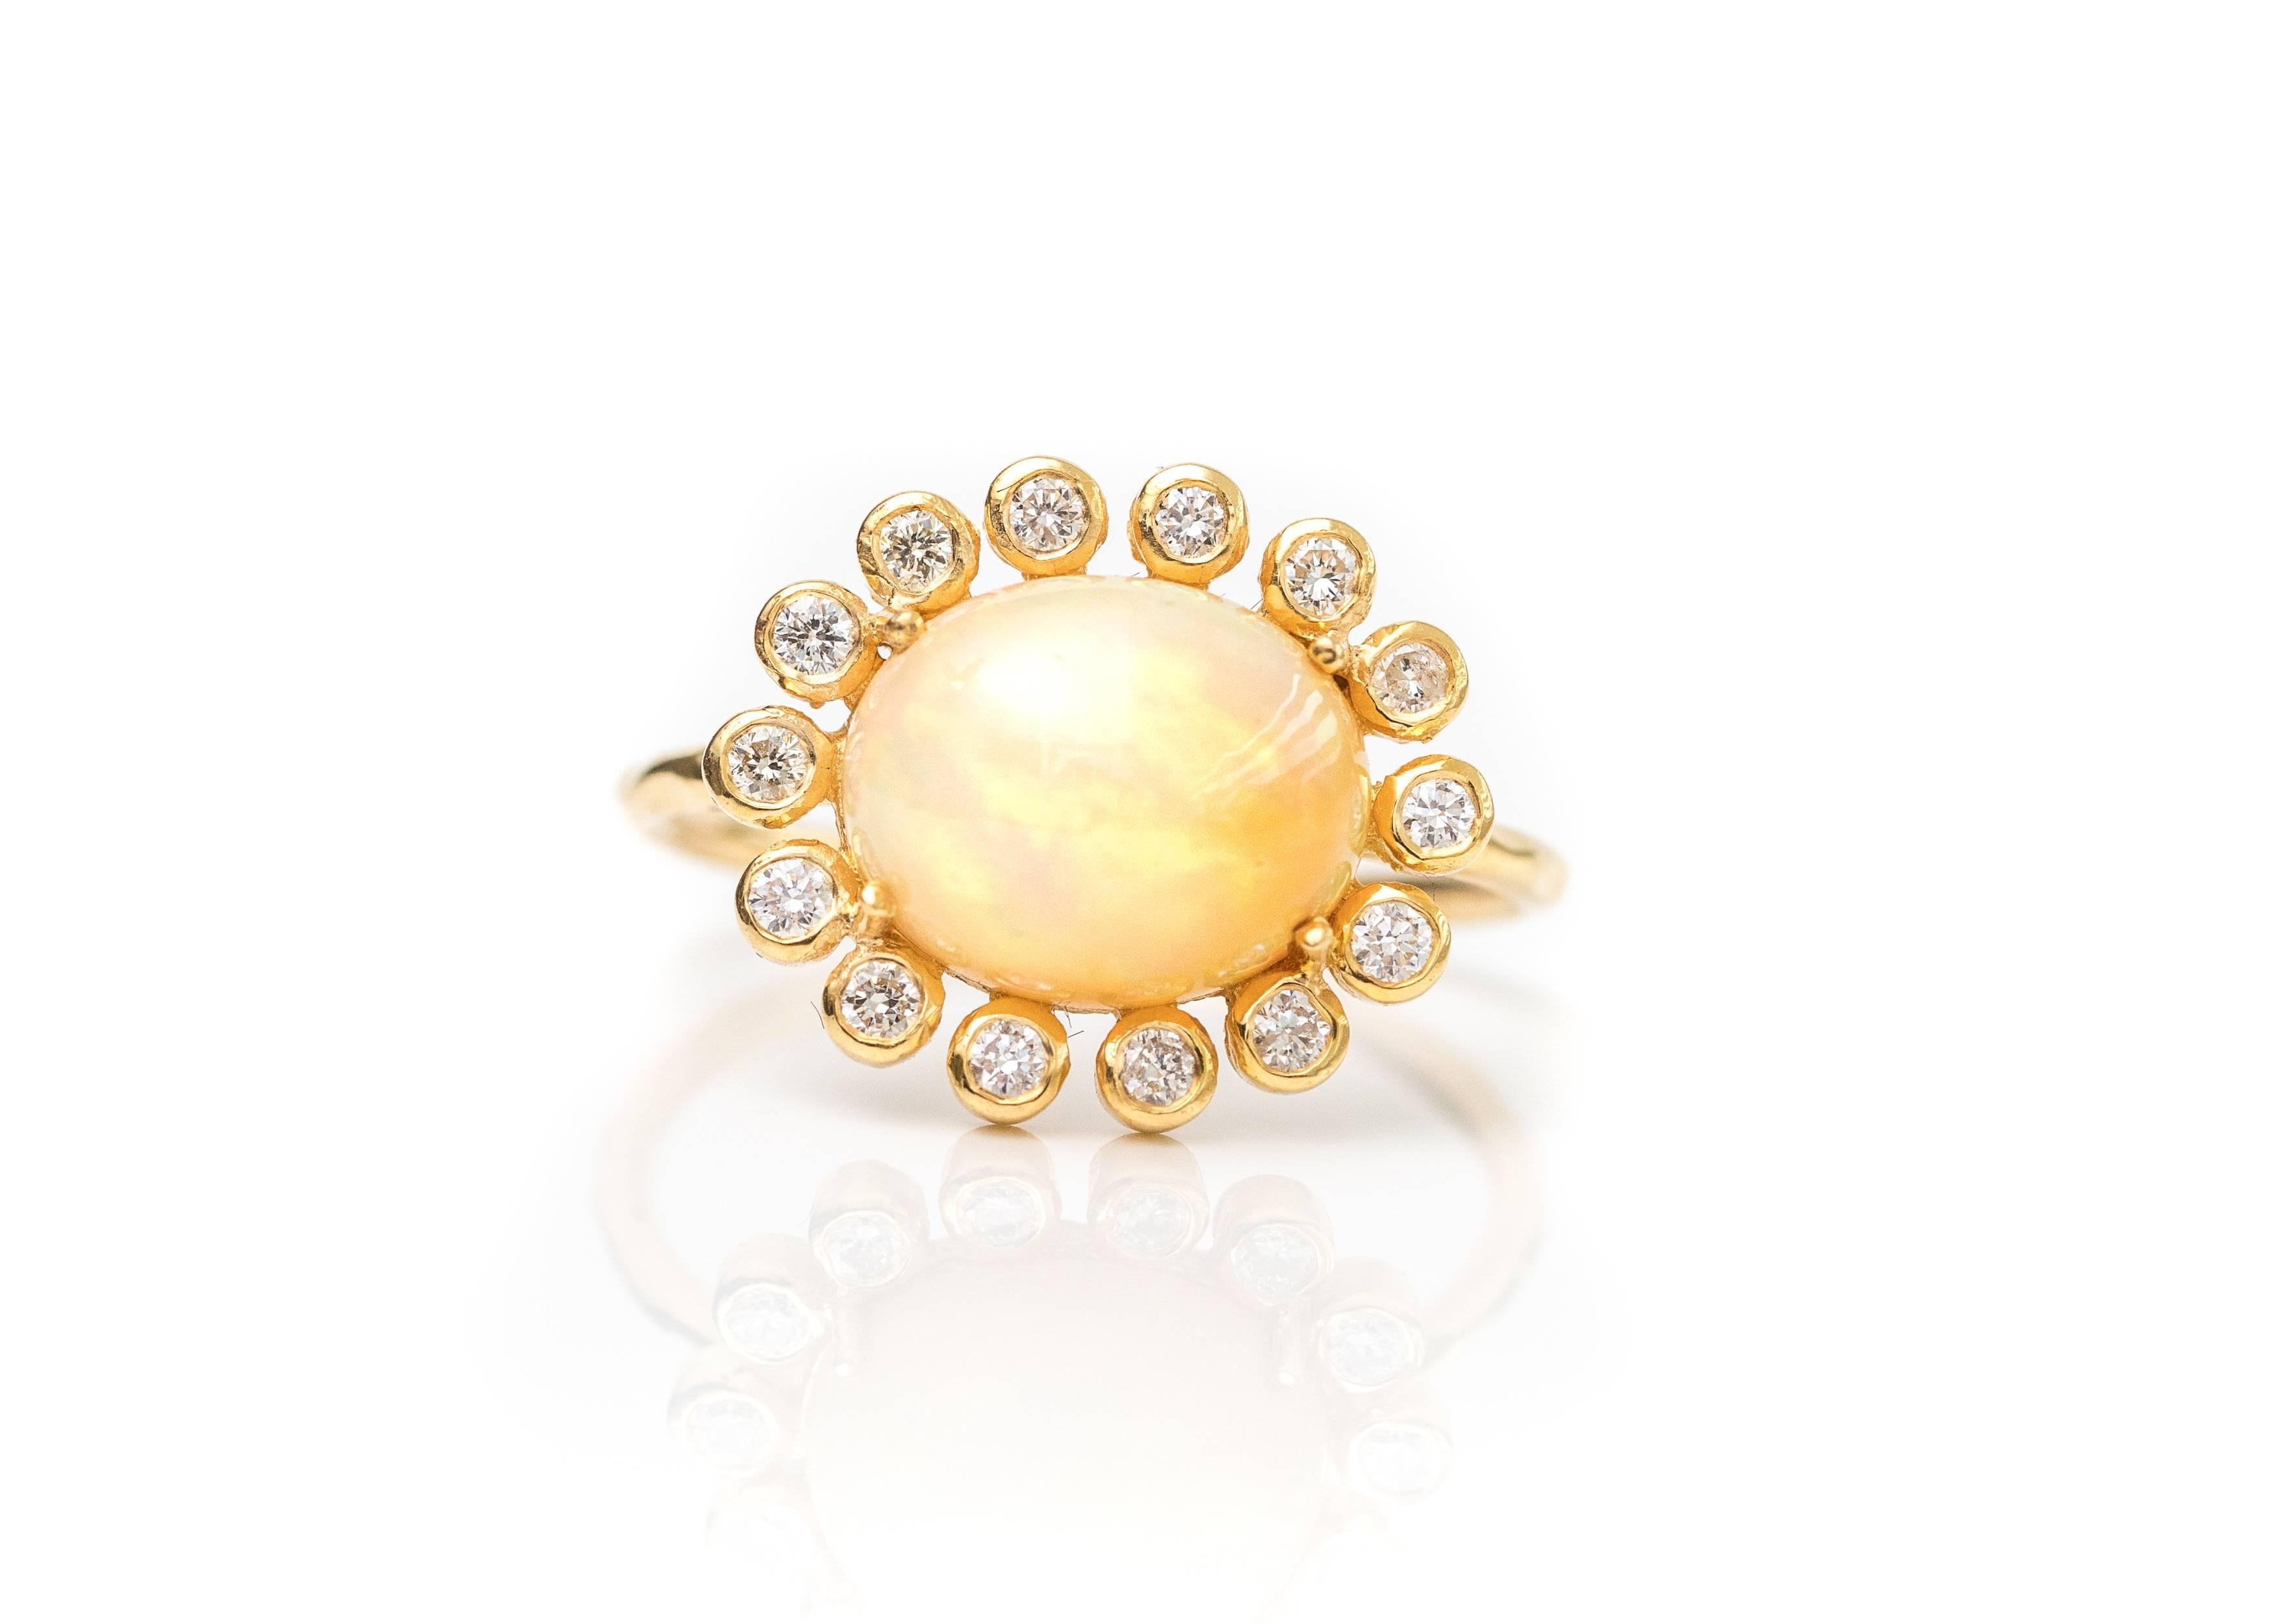 2.7 carat Opal with Diamond Halo and 18 Karat Yellow Gold Ring

Features a 2.7 carat Ethiopian Opal center stone, a Diamond Halo and 18 Karat Yellow Gold. The stunning Oval Opal center stone is prong set in an East-West direction. This brilliant